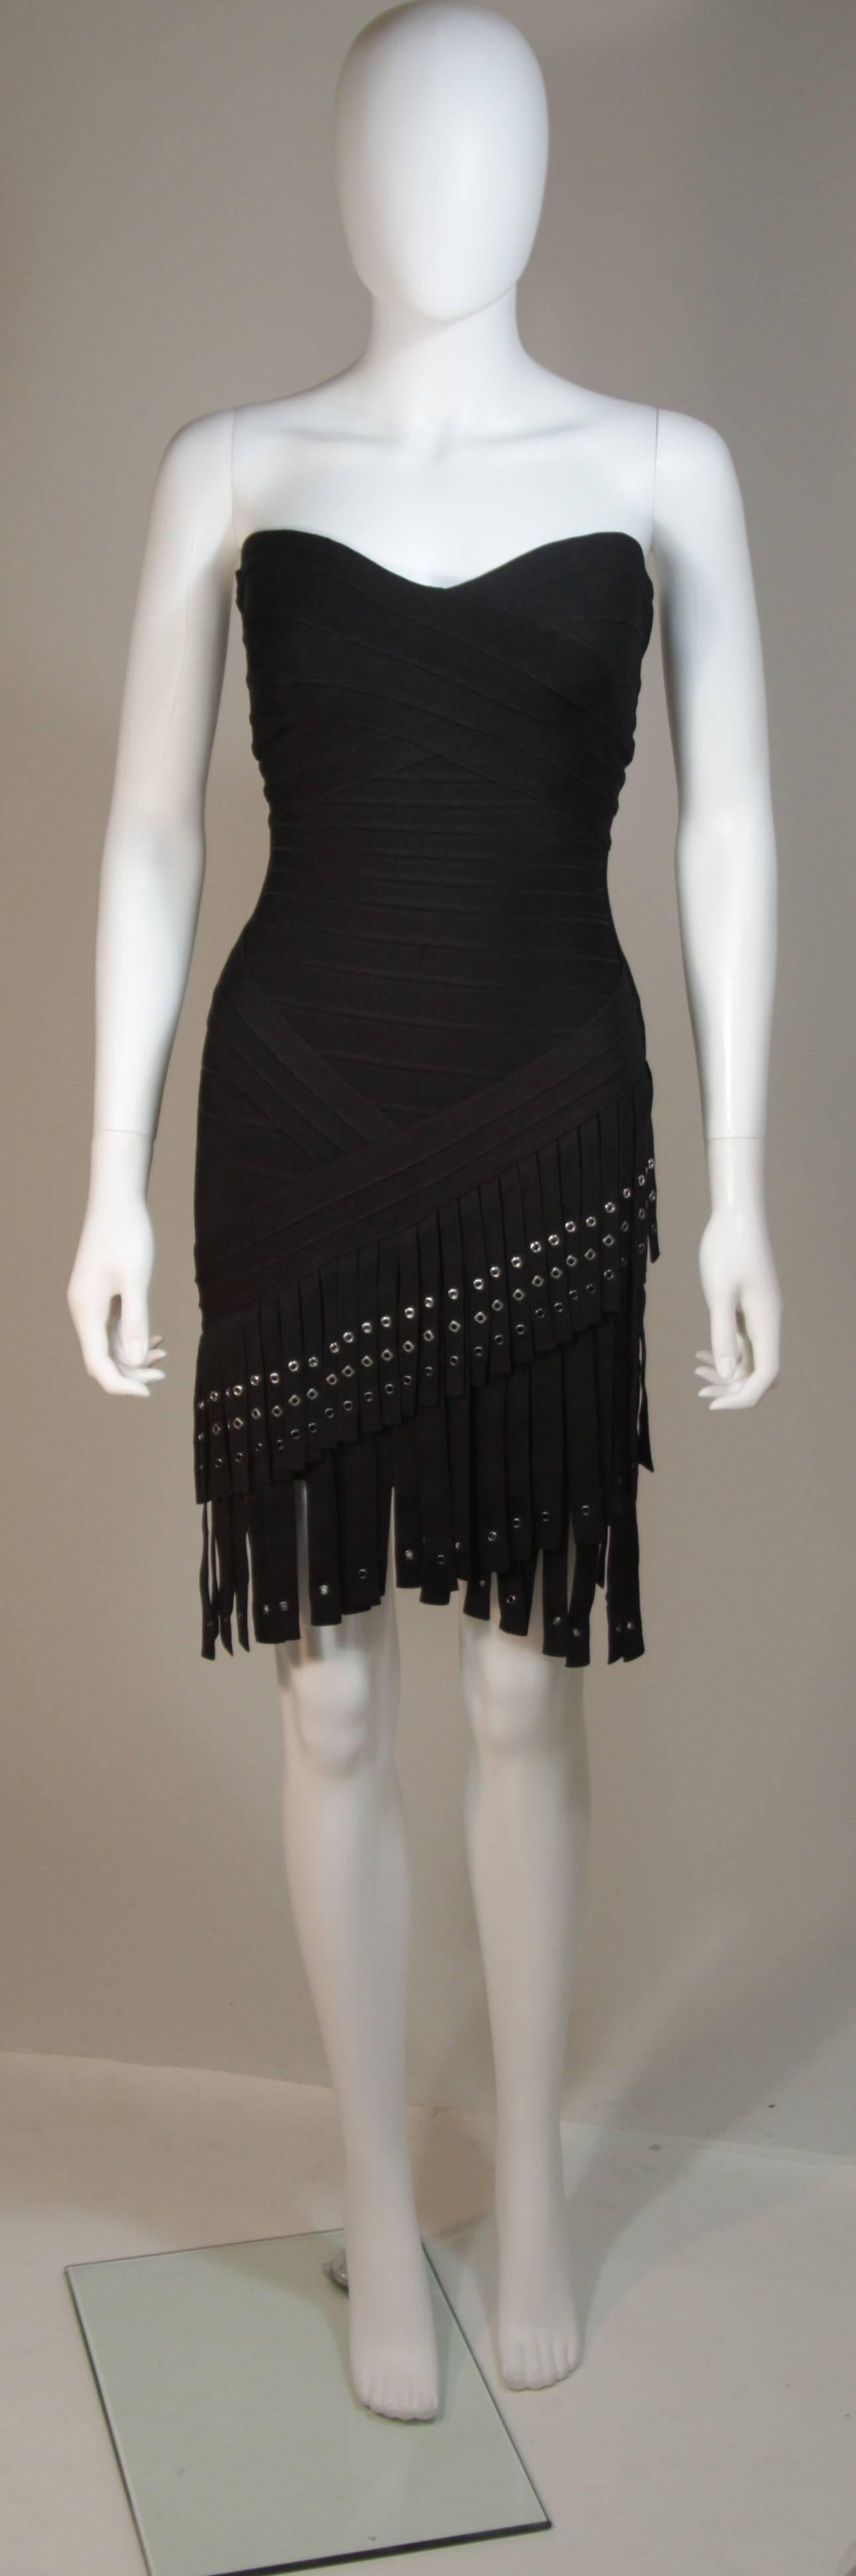 This Herve Leger design is available for viewing at our Beverly Hills Boutique. We offer a large selection of evening gowns and luxury garments. 

 This dress is composed of a black elastic with fringe and grommet details. There is a center back